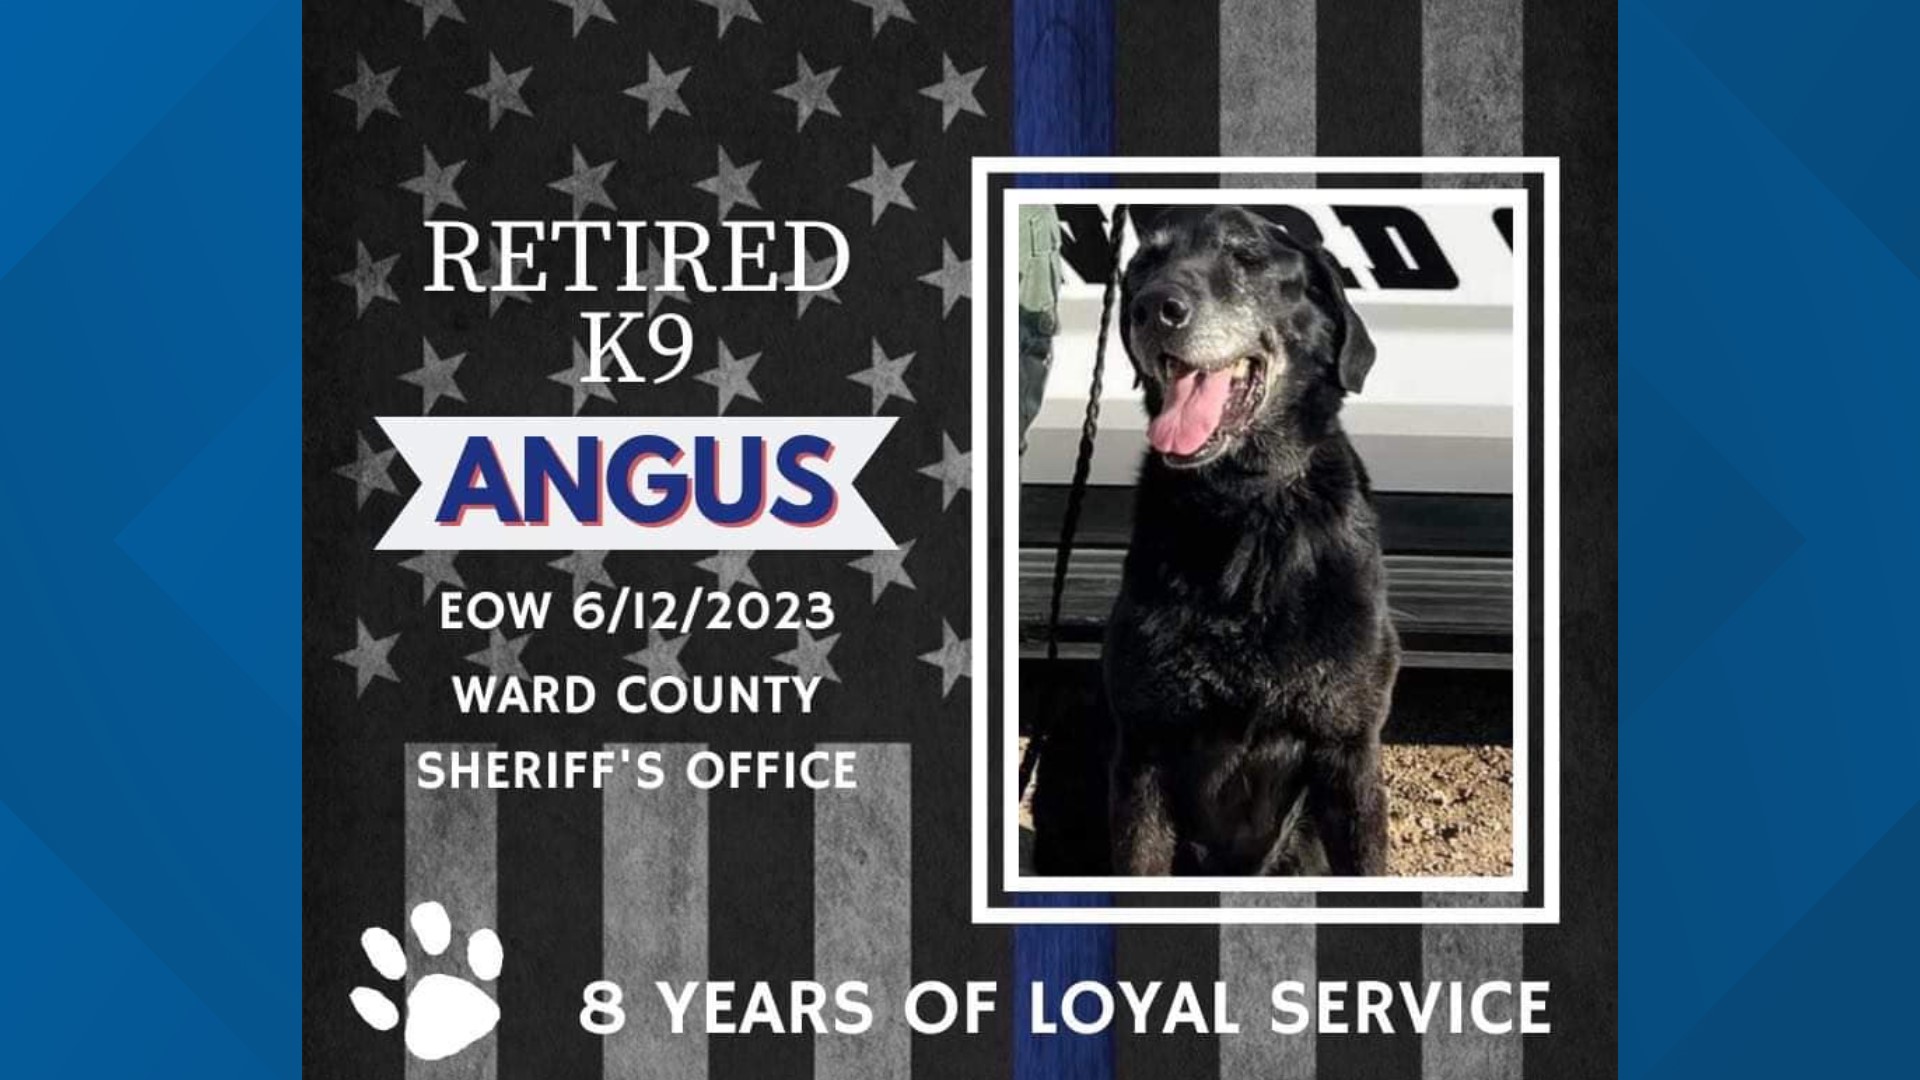 Angus has served Ward County since 2014 and worked with deputies during numerous drug busts.